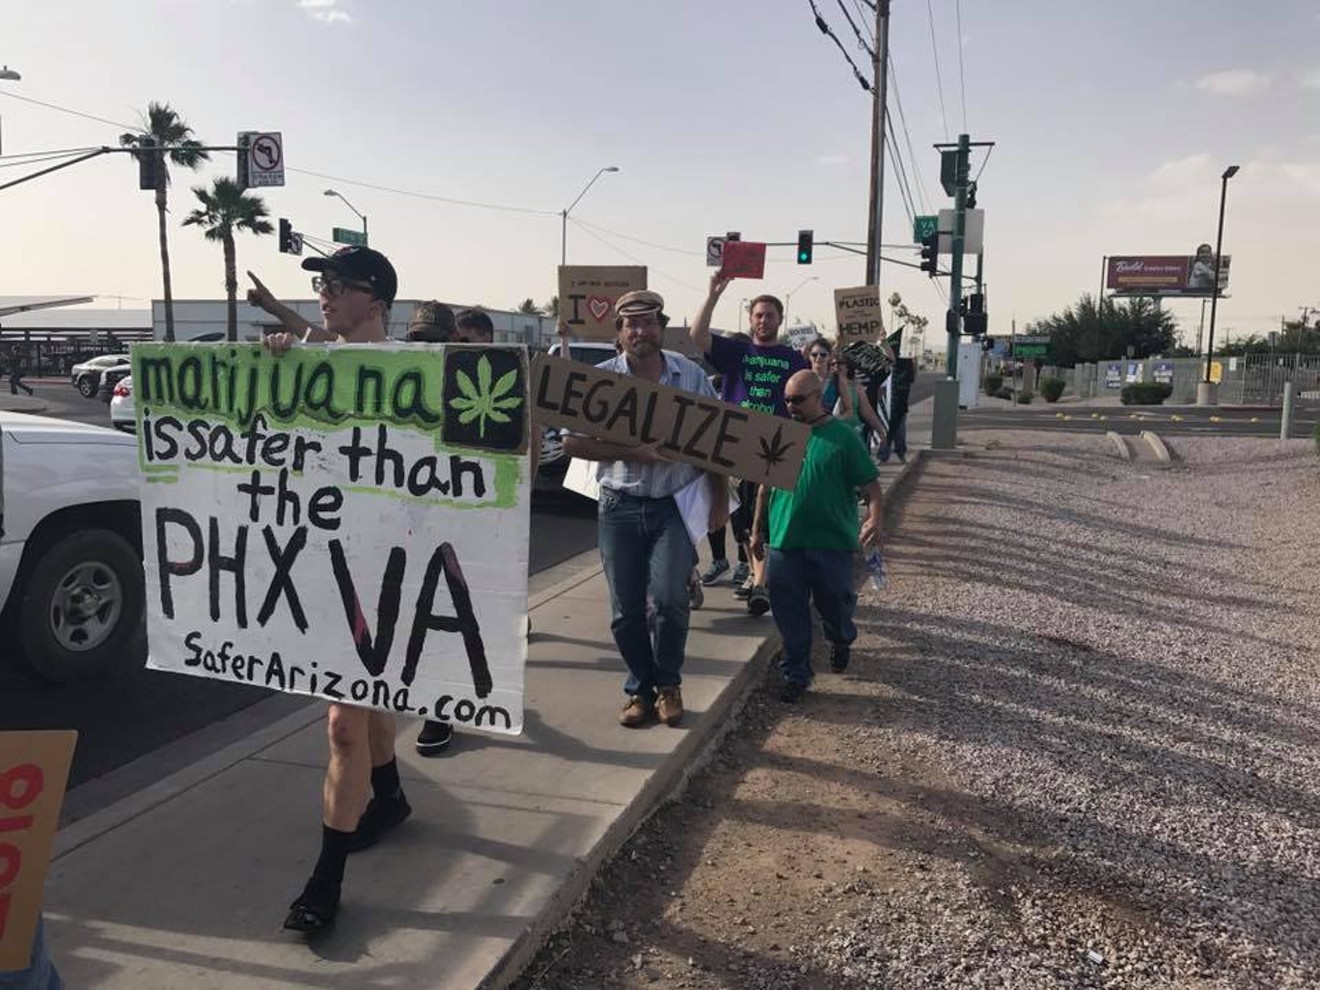 Supporters of Safer Arizona held a march on Saturday in conjunction with the national "Million Marijuana March."